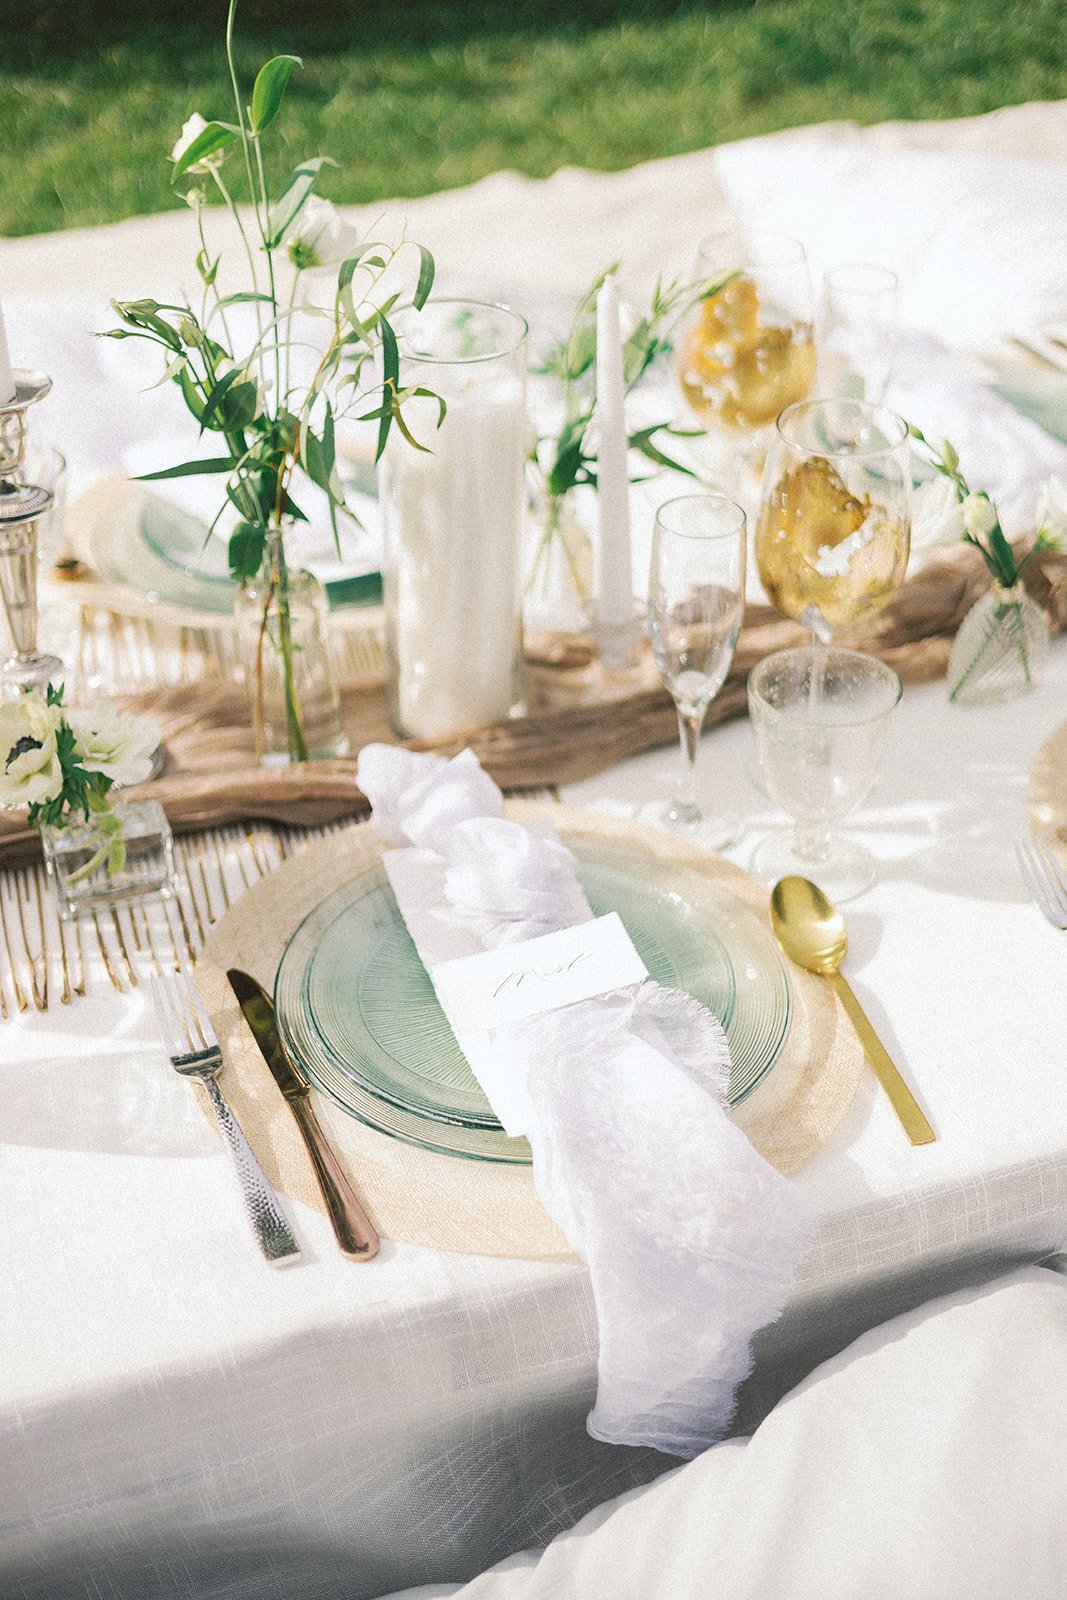 A long table with white linens and green and white cushions for a French picnic-style reception